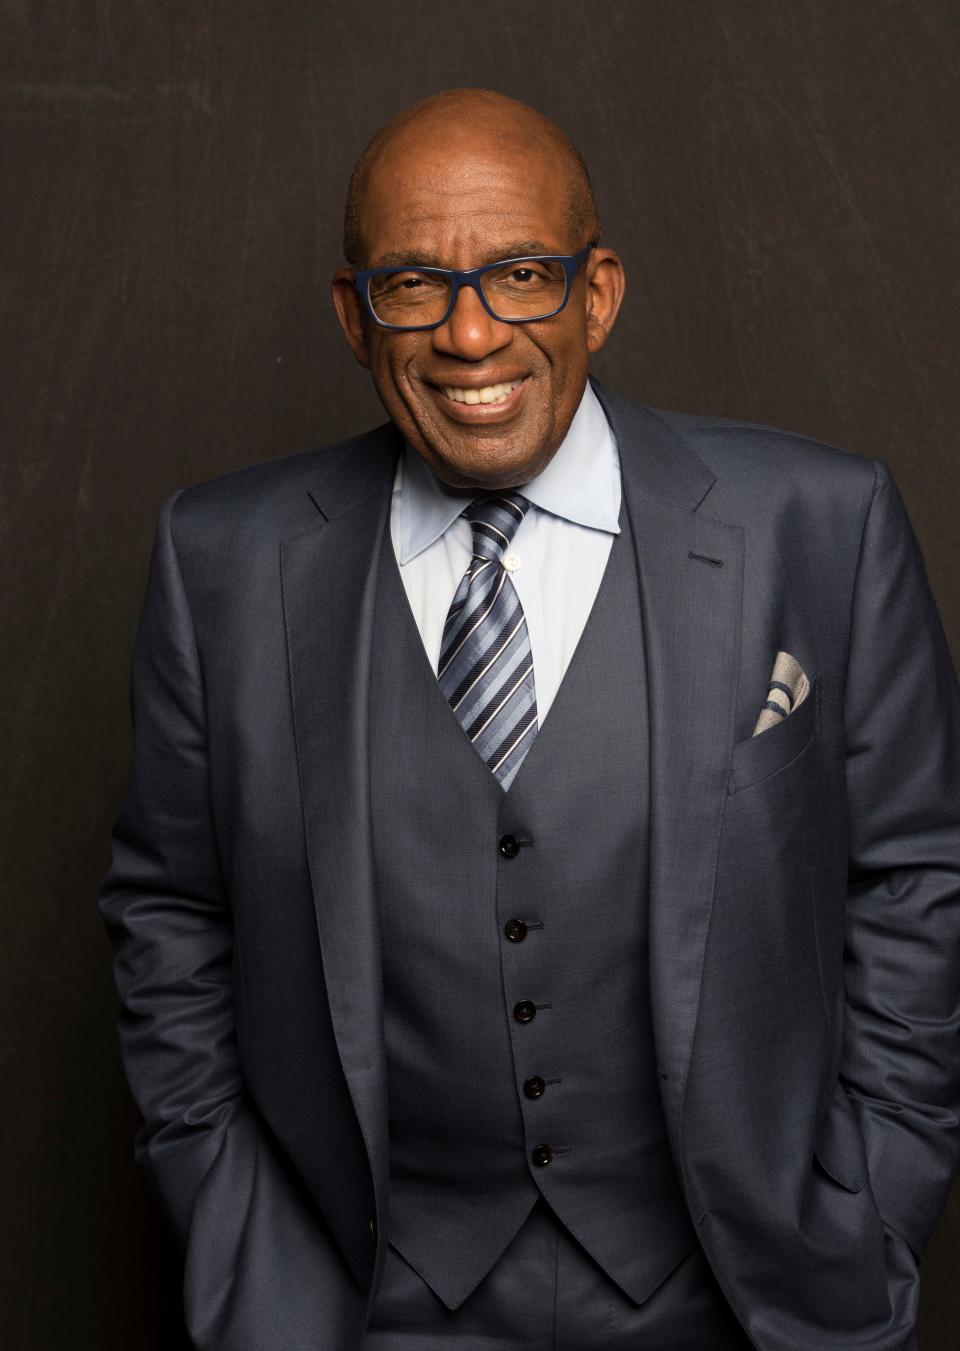 Al Roker poses for a photo in May 2018.